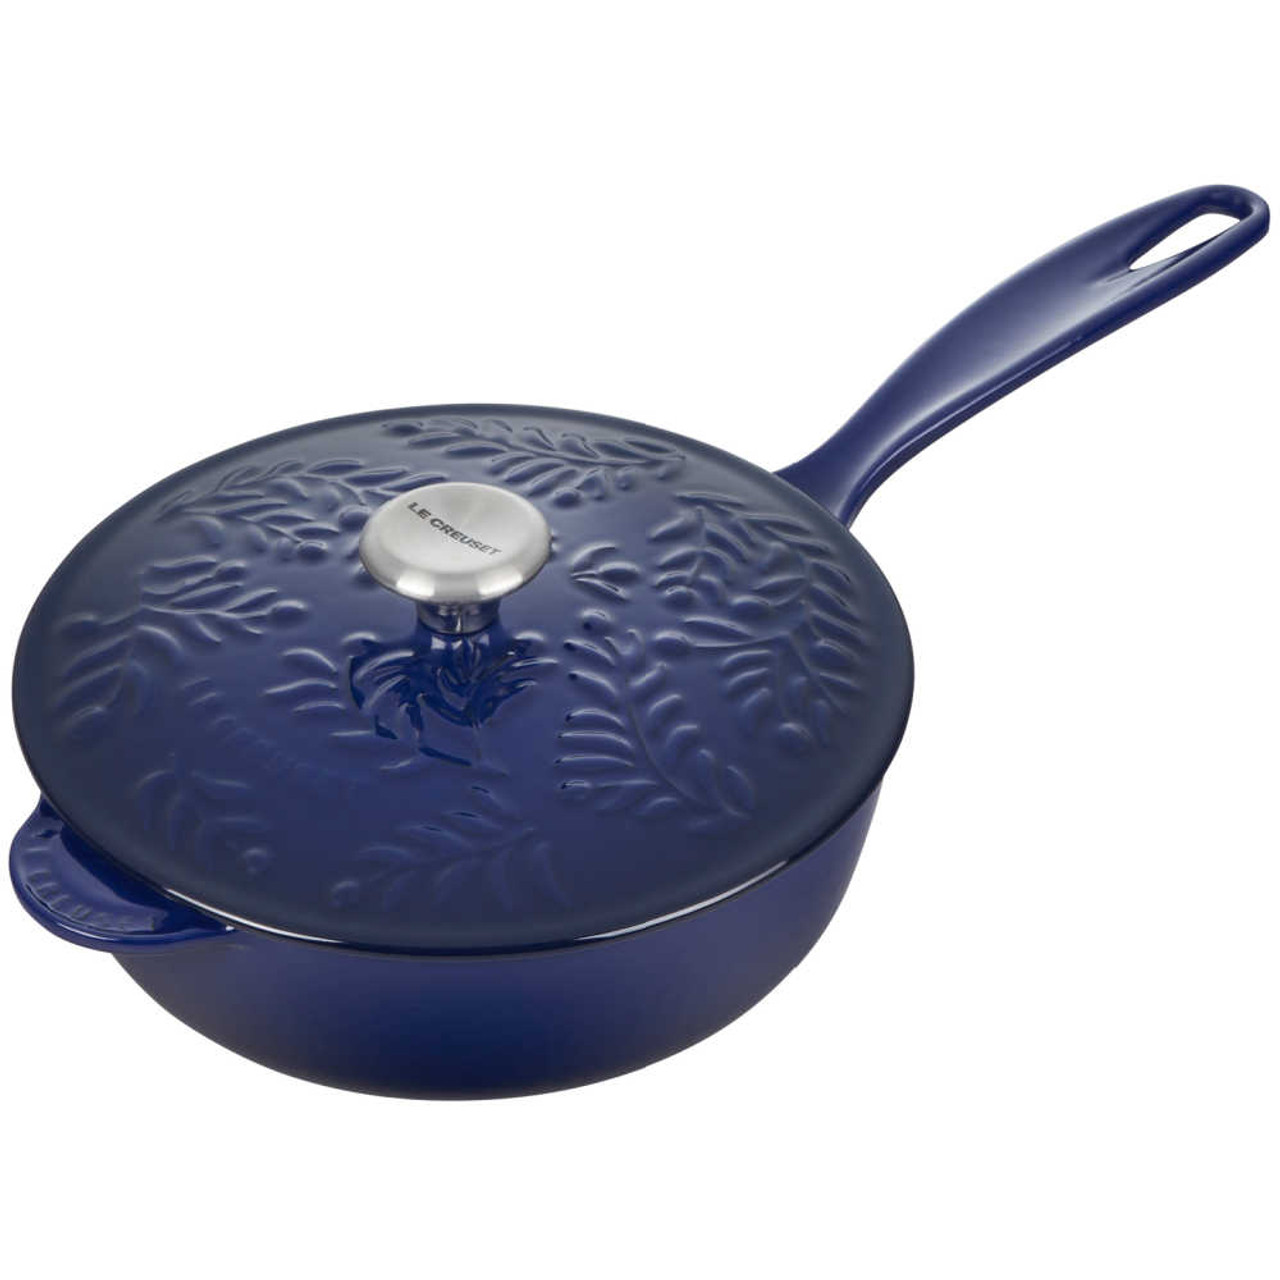 https://cdn11.bigcommerce.com/s-hccytny0od/images/stencil/1280x1280/products/5504/24034/Le_Creuset_Olive_Branch_Collection_Saucier_in_Indigo_1__11806.1688654472.jpg?c=2?imbypass=on